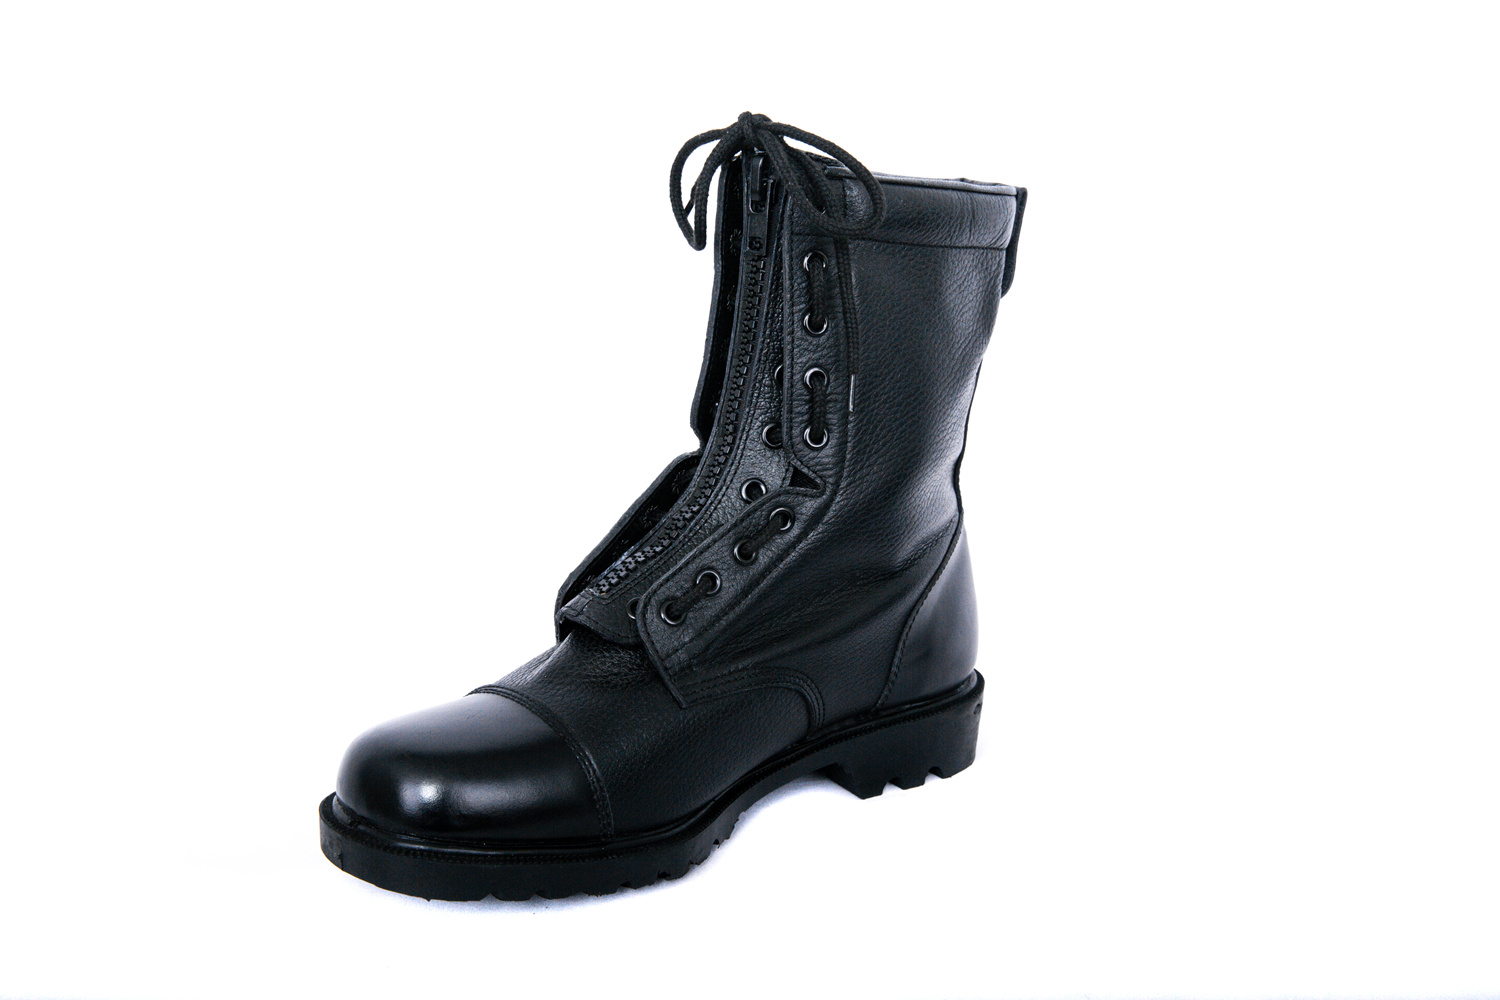 Full leather army combat boots with middle zipper